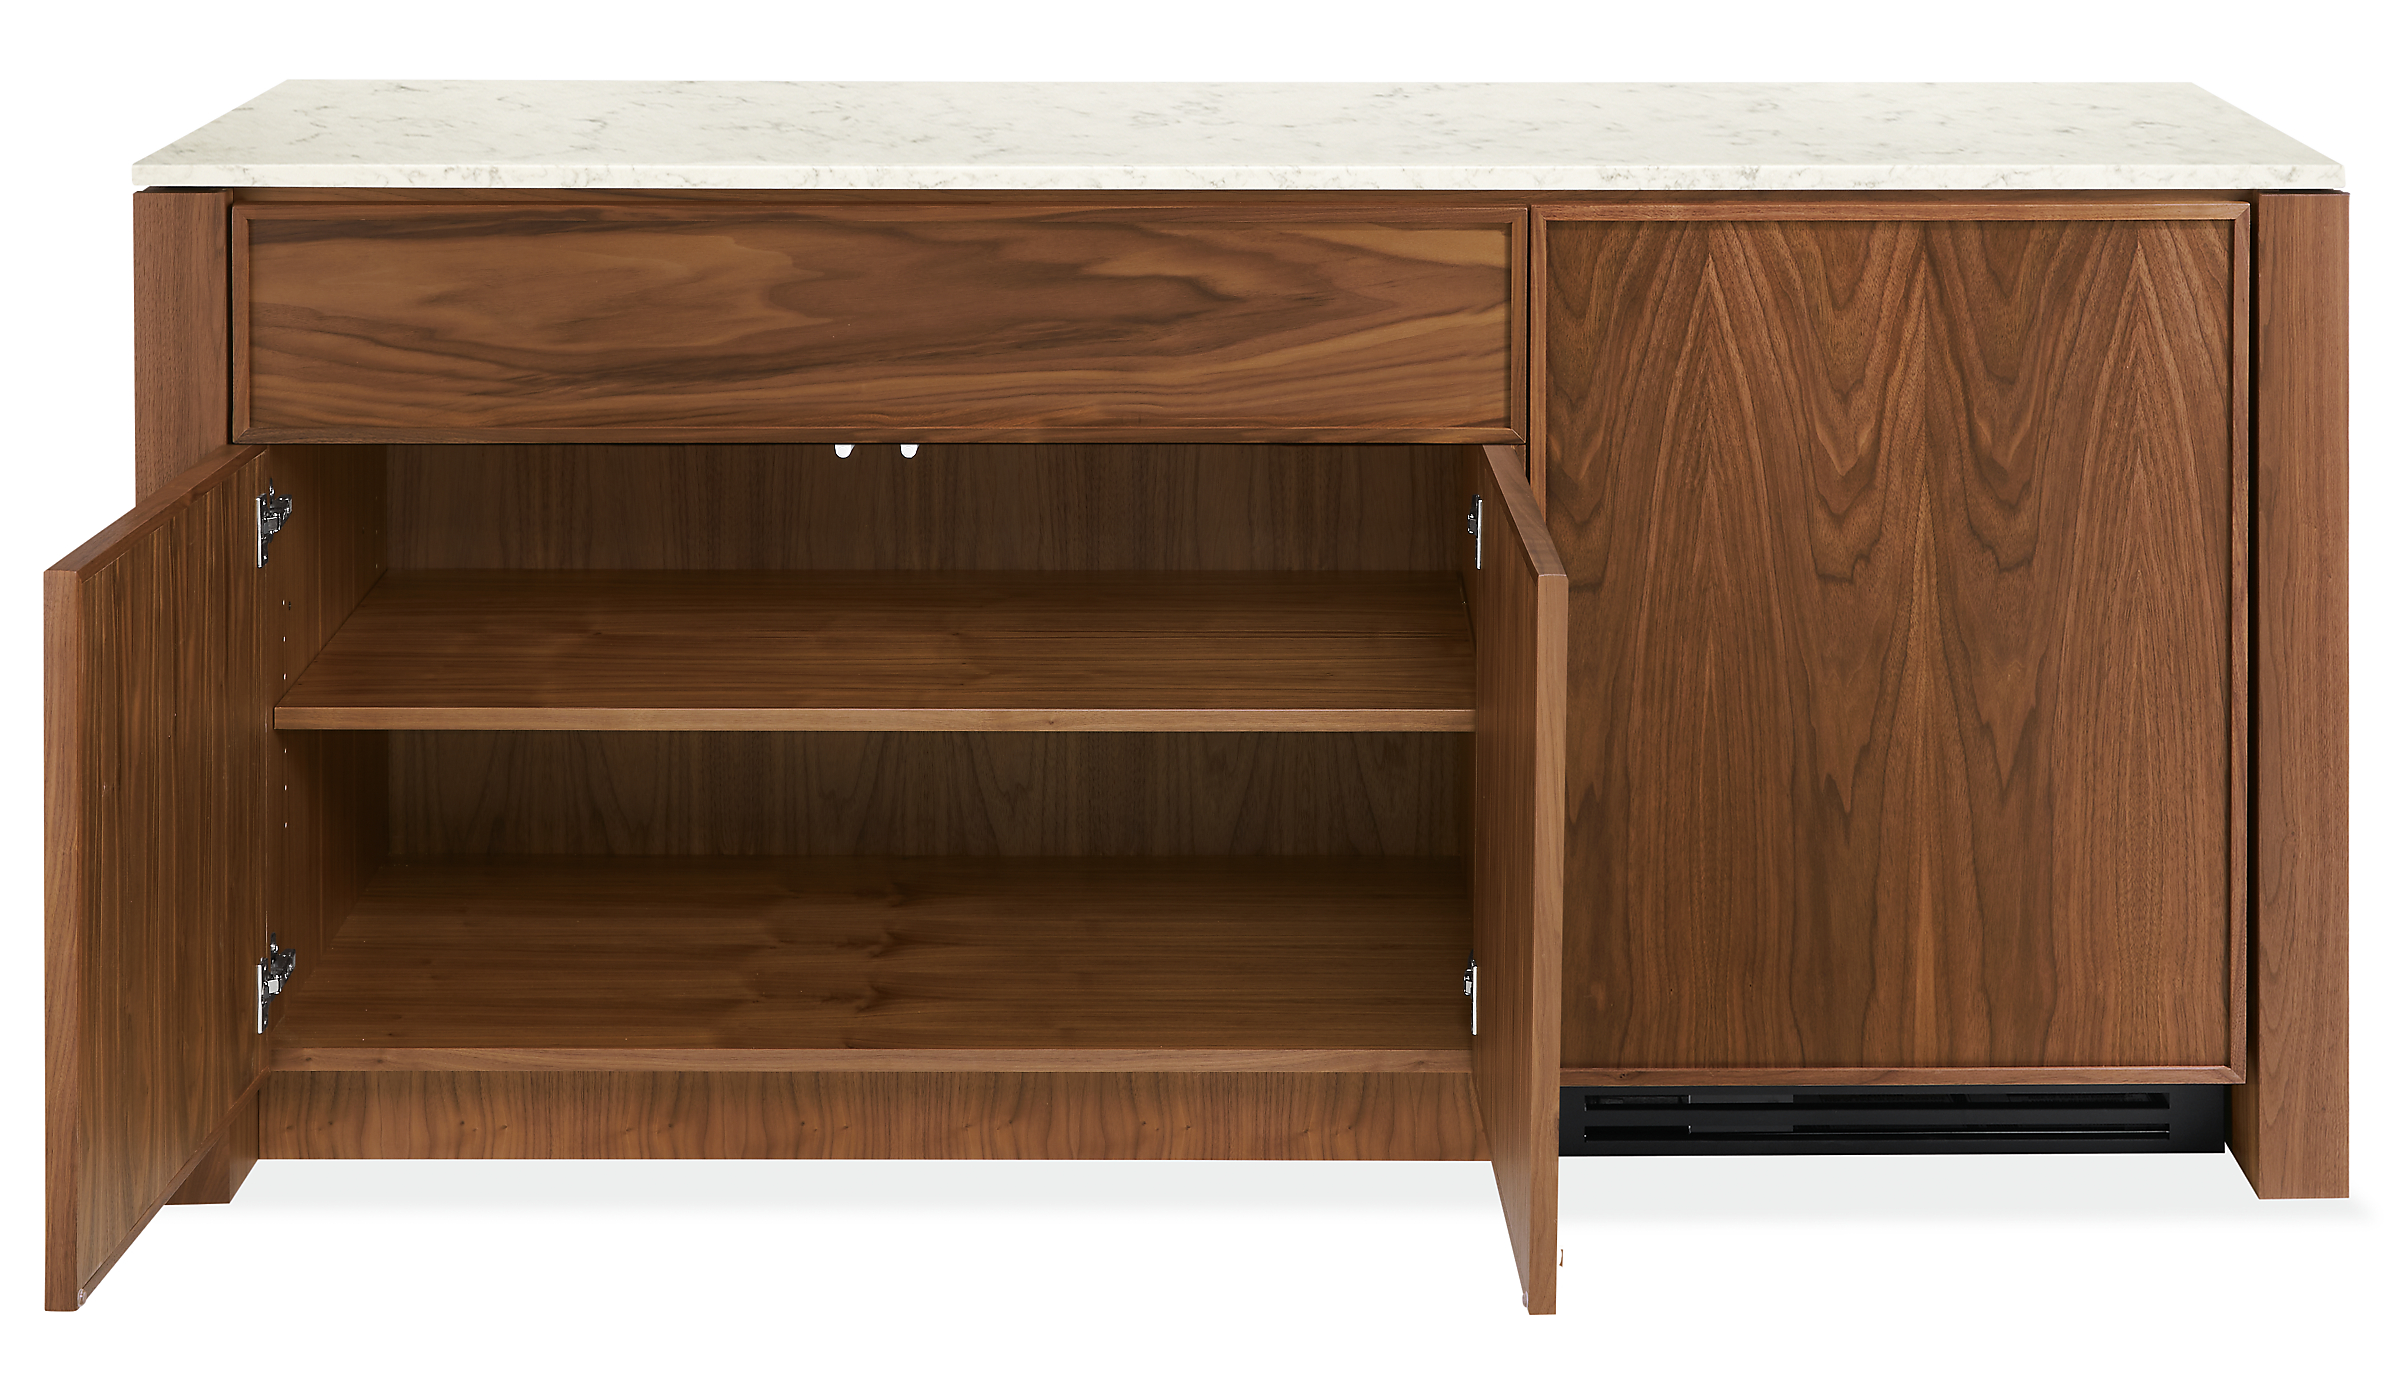 Front view of Amherst 72-wide Storage Cabinet in Walnut with closed Wood Fridge and open cabinet doors.